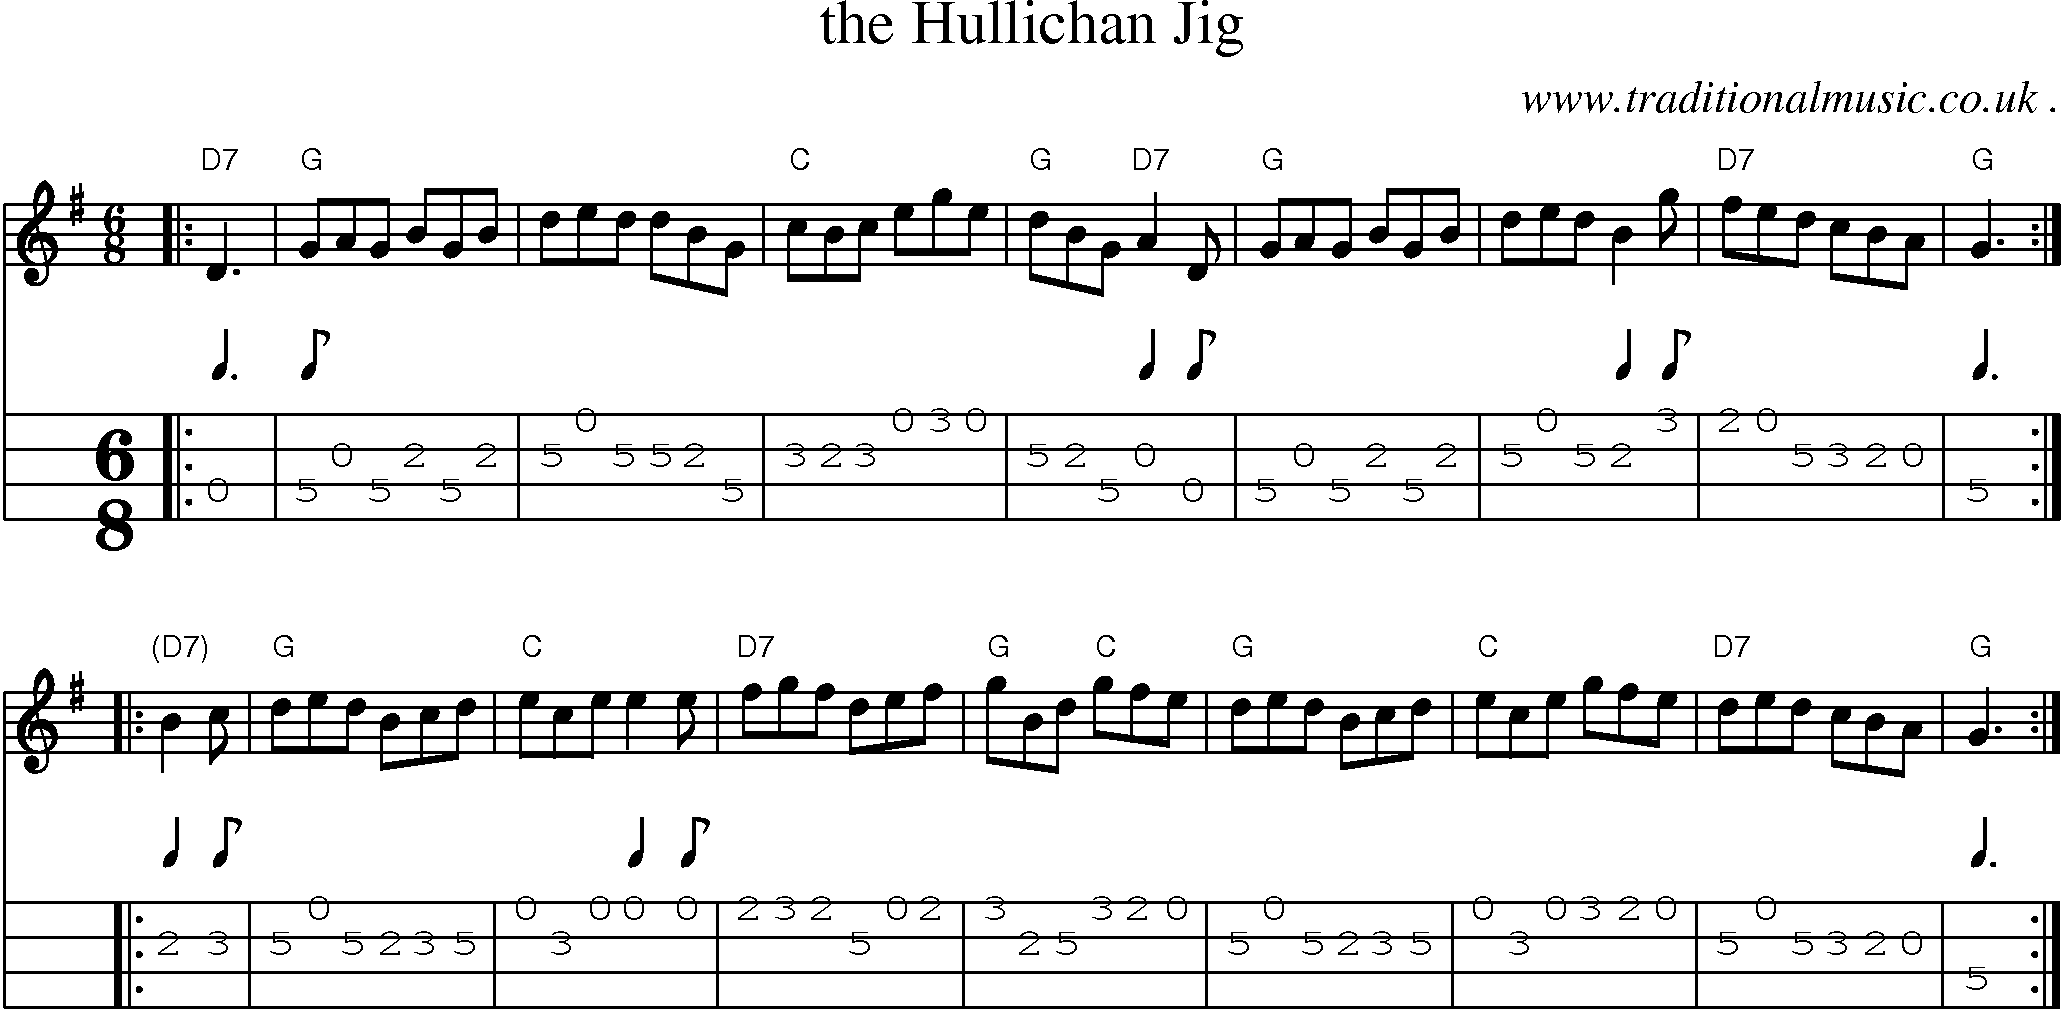 Sheet-music  score, Chords and Mandolin Tabs for The Hullichan Jig